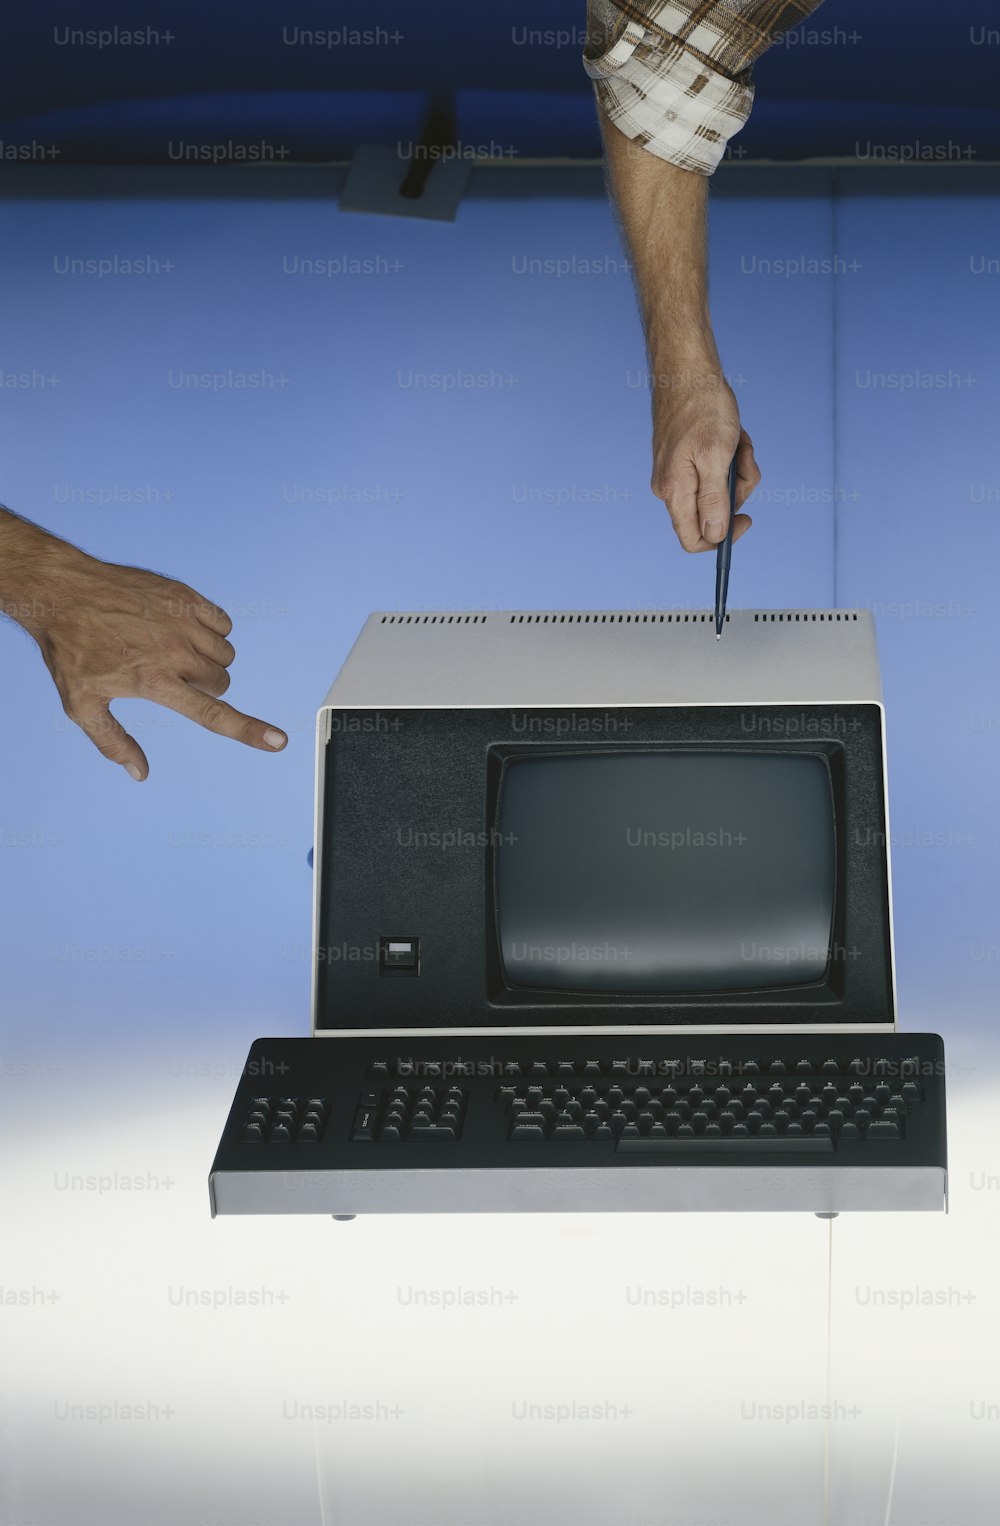 a hand is holding a knife over a computer